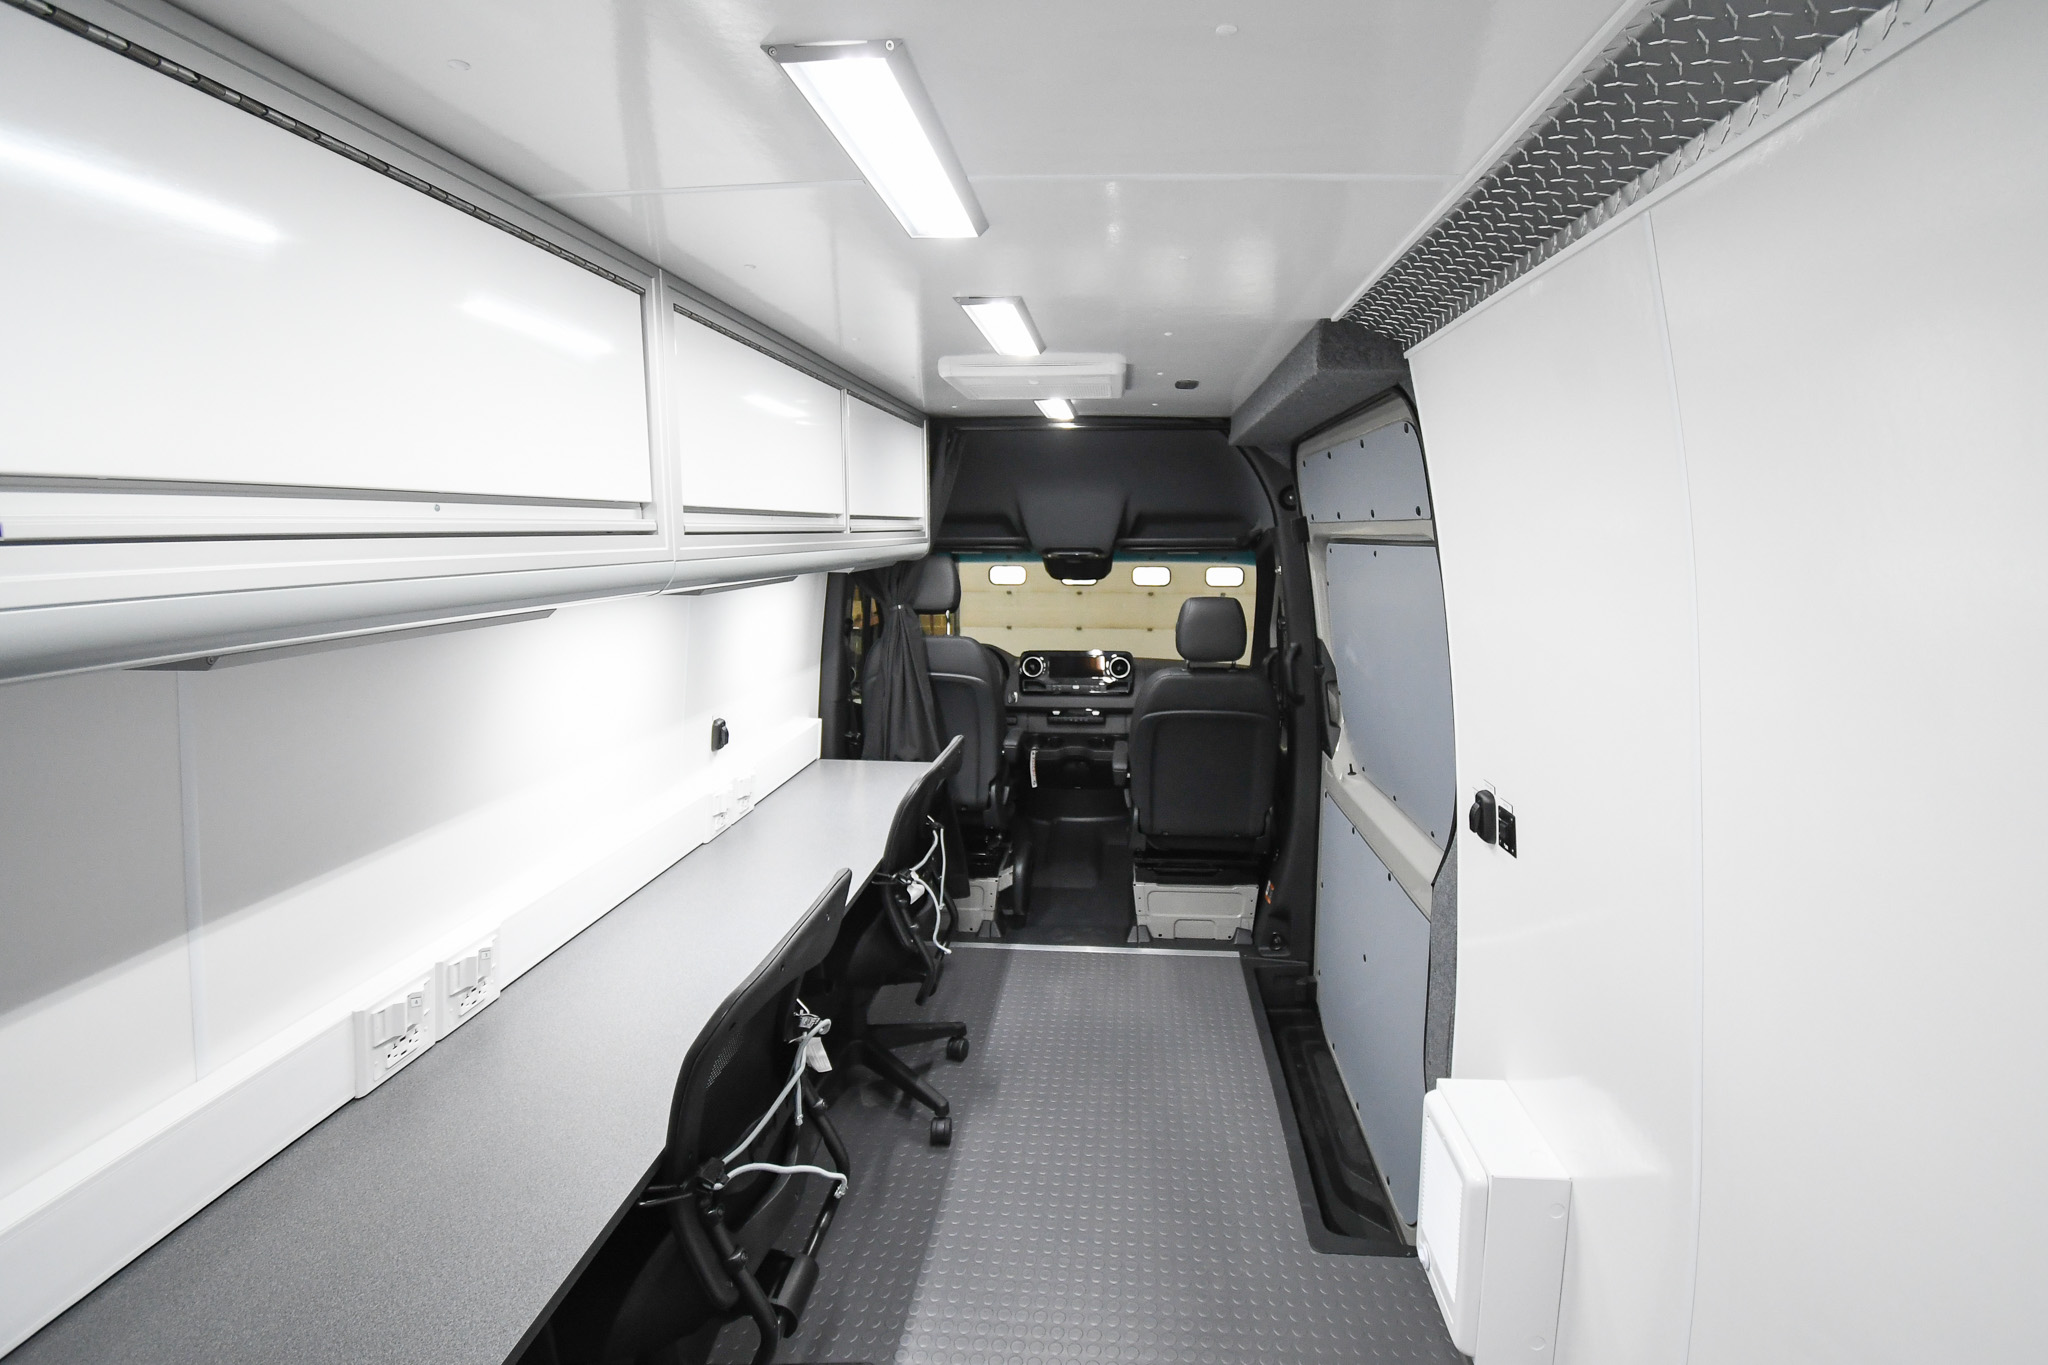 A back-to-front view inside the unit for West Chester, OH.